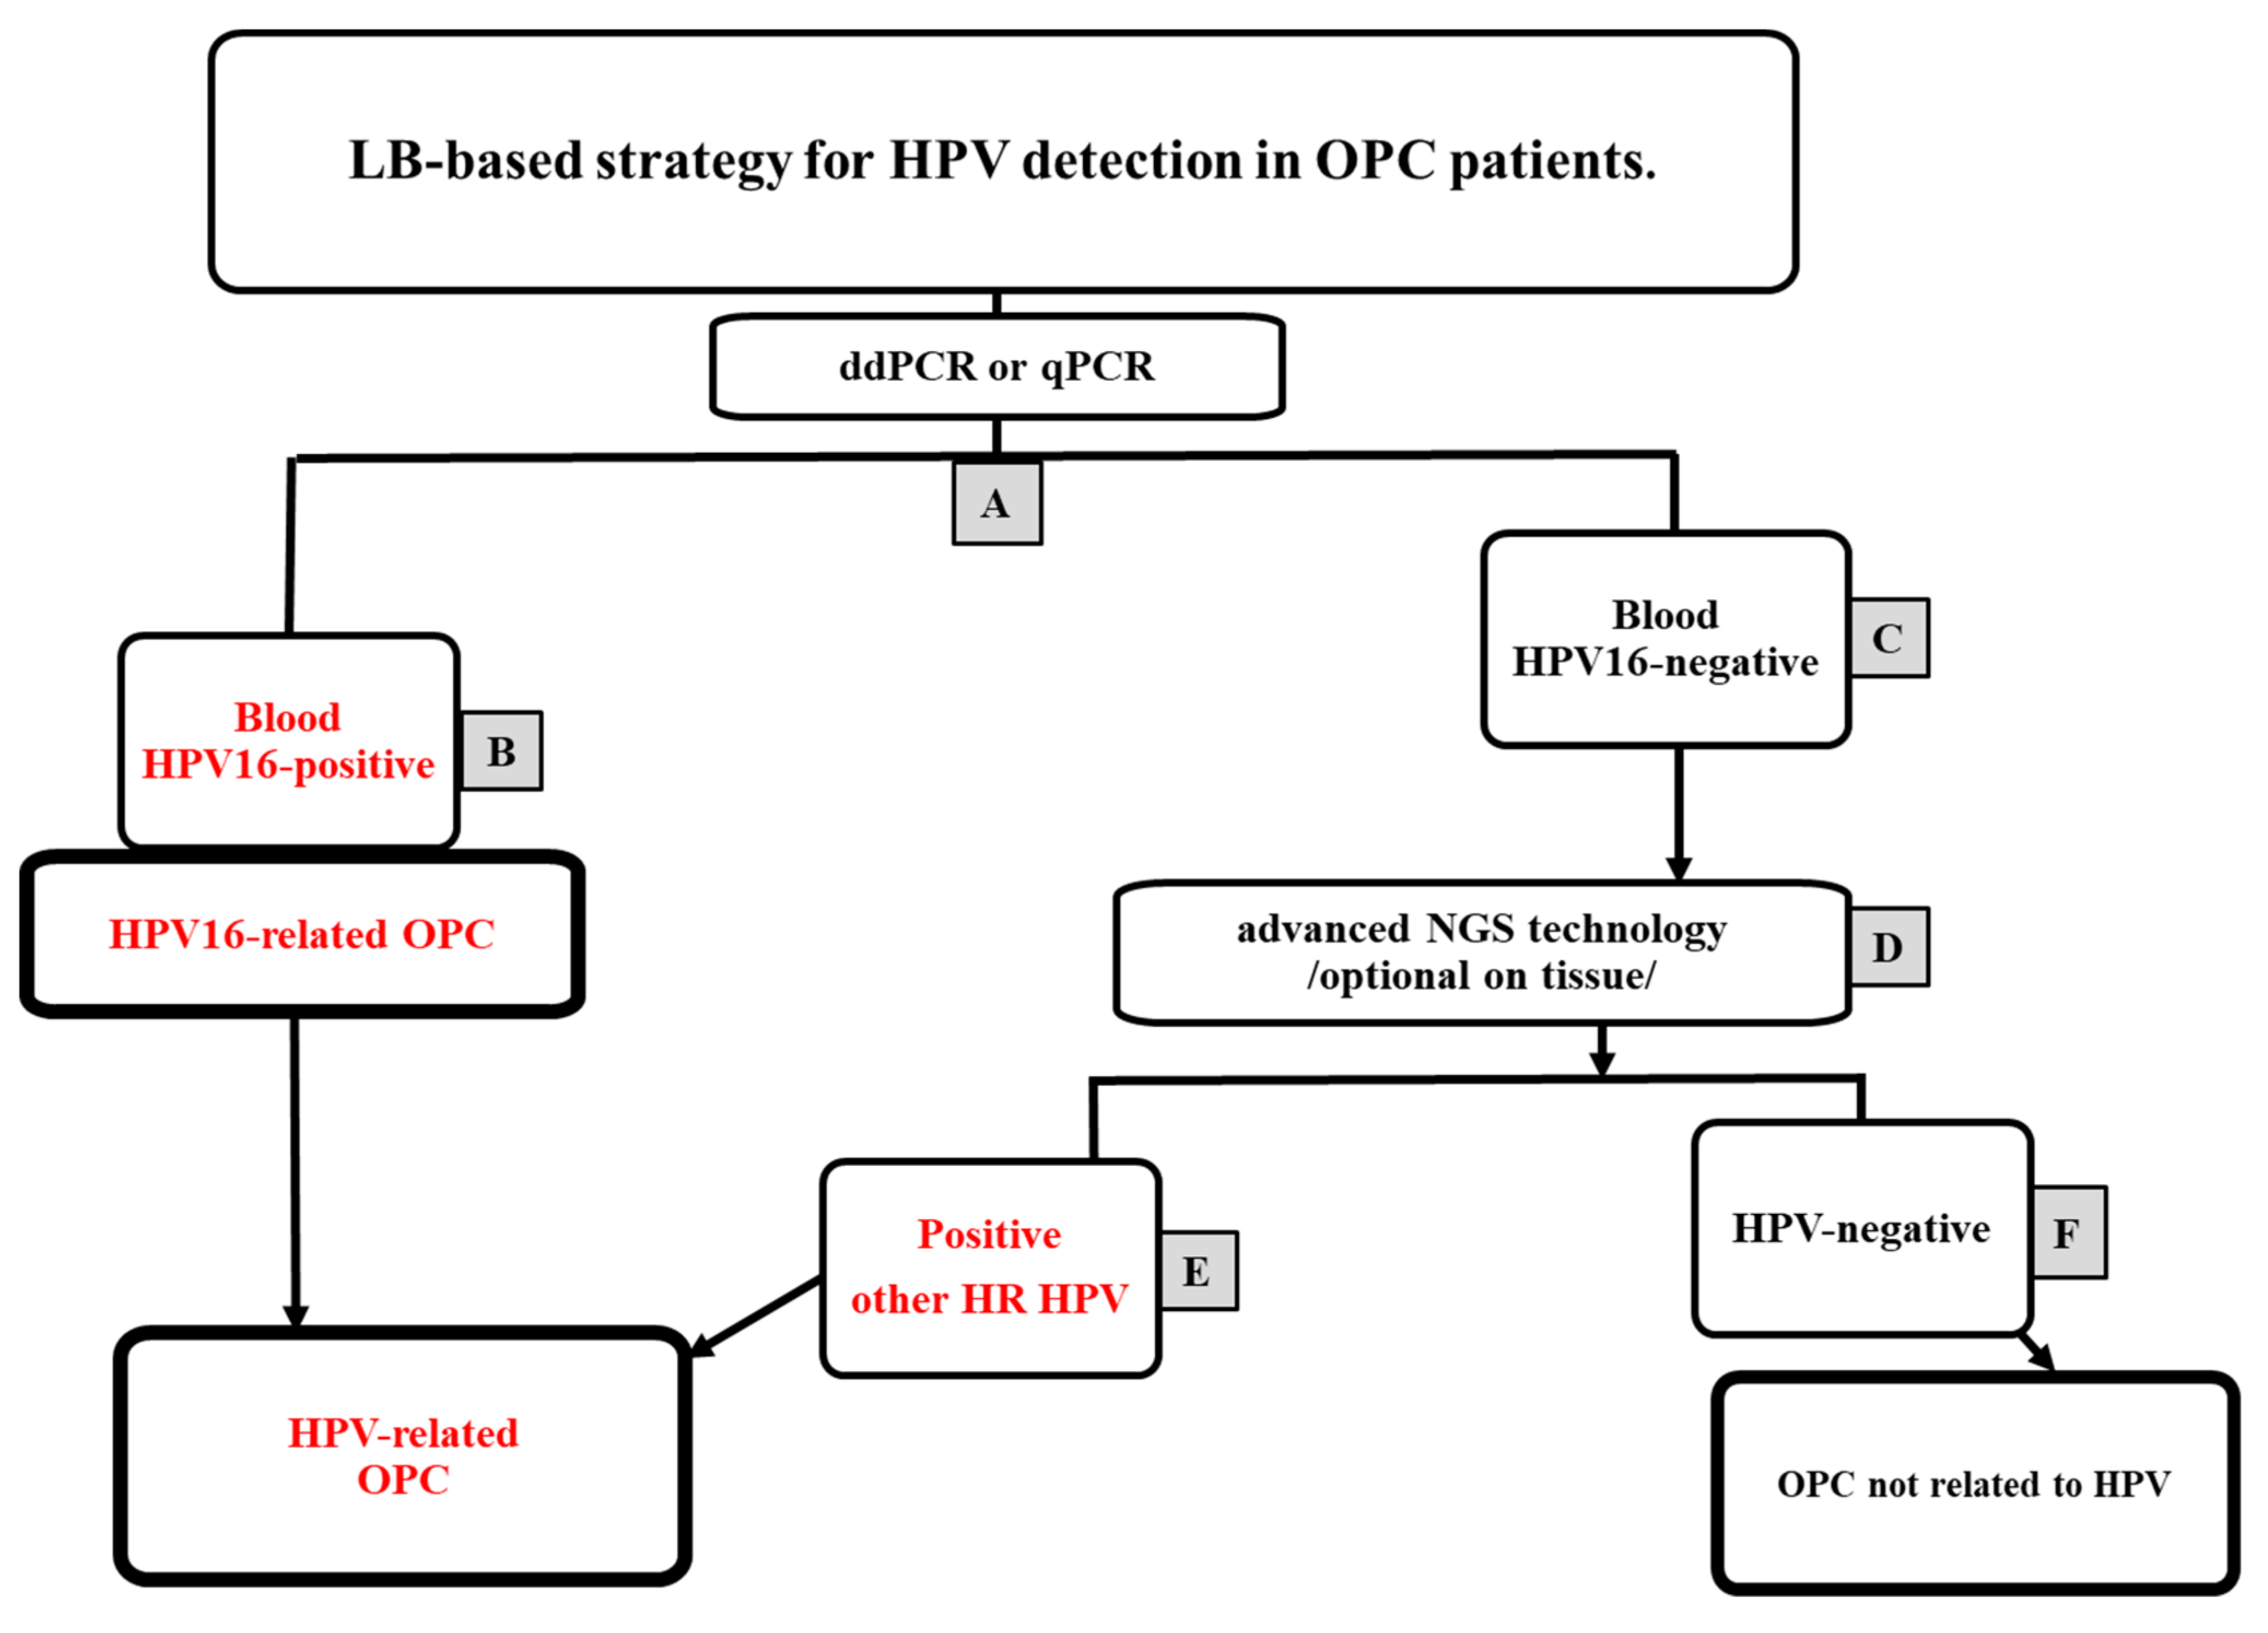 Cancers | Free Full-Text | Practical Application of Circulating  Tumor-Related DNA of Human Papillomavirus in Liquid Biopsy to Evaluate the  Molecular Response in Patients with Oropharyngeal Cancer